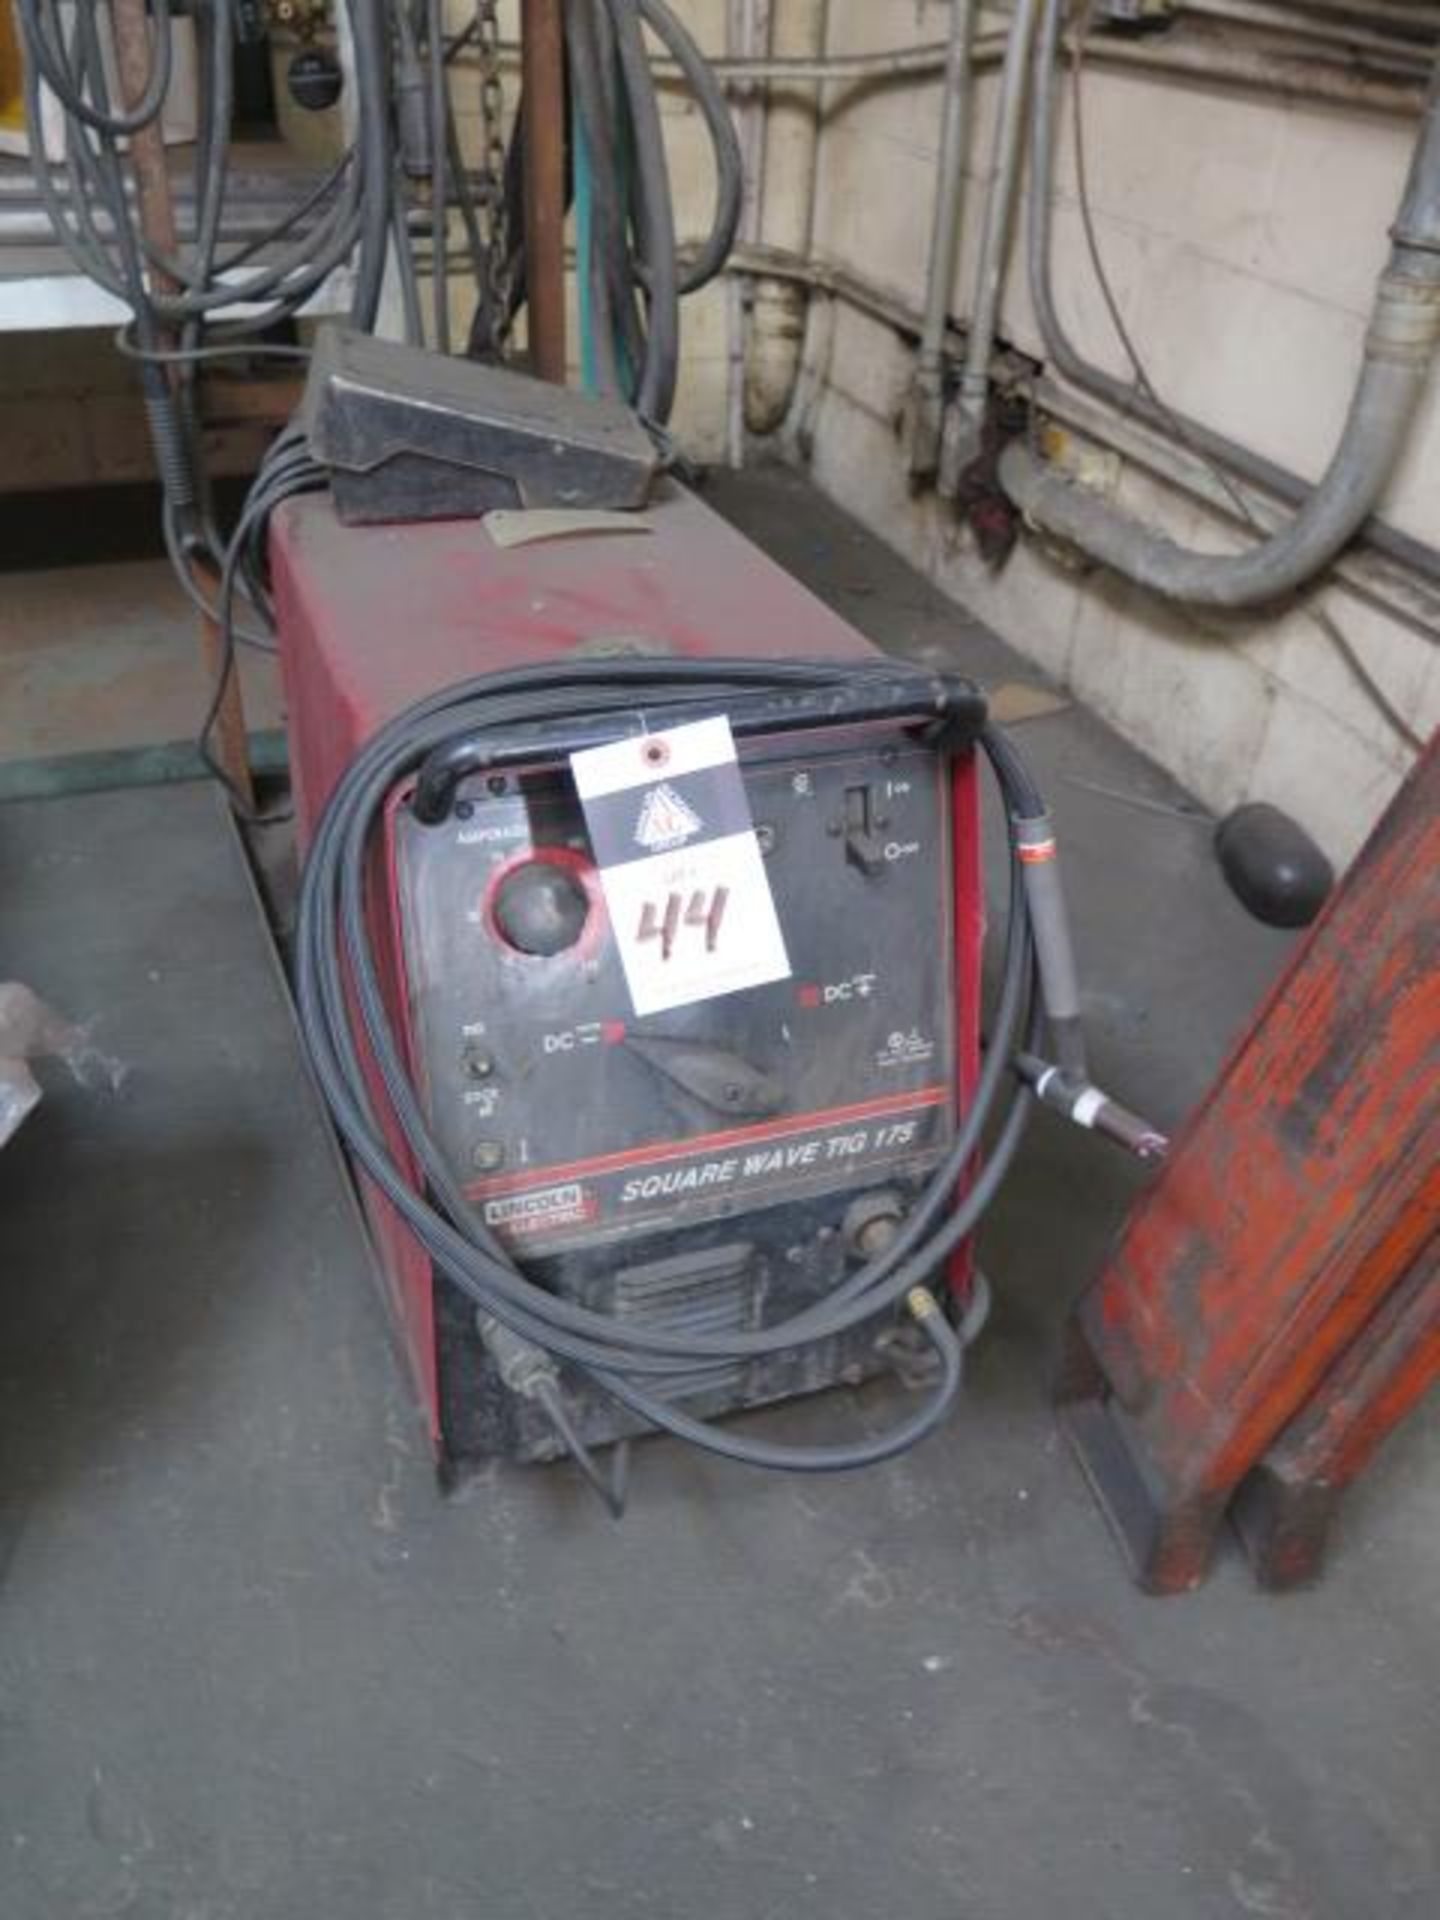 Lincoln Square Wave TIG 157 TIG Welding Power Source (SOLD AS-IS AND WITH NO WARRANTY)